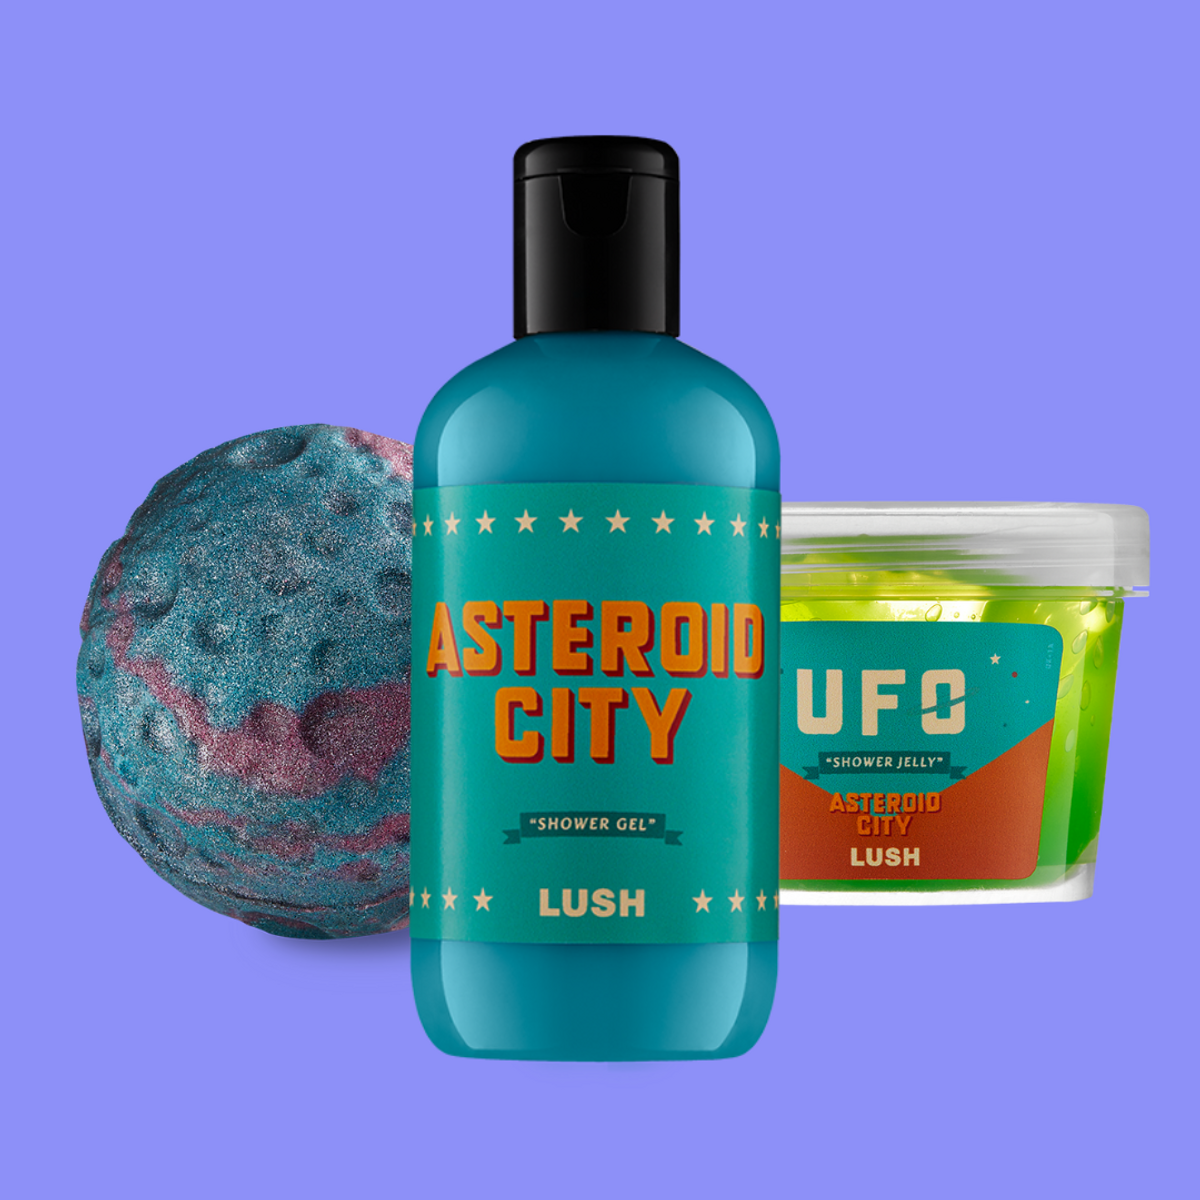 lush bath bombs for wes anderson asteroid city